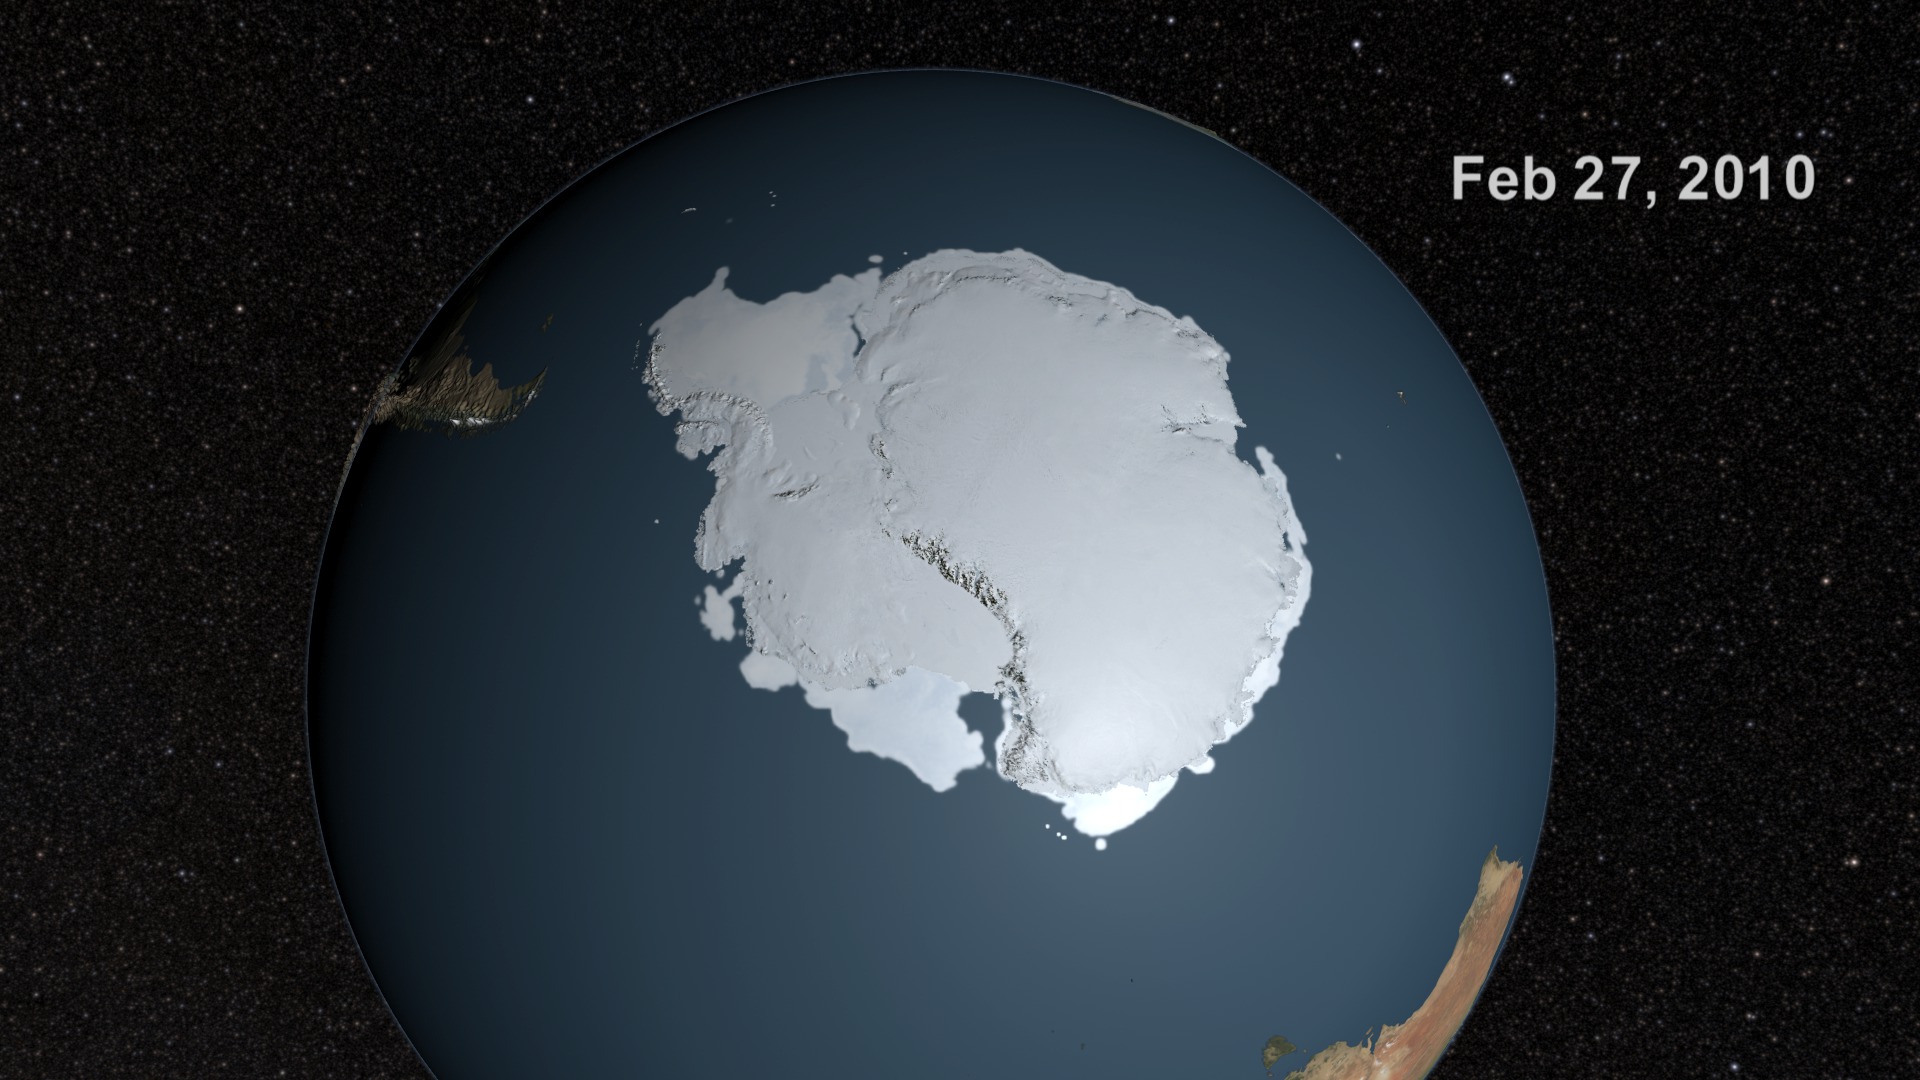 This animation shows the advance and retreat of the Antarctic sea ice with a star background and a date overlay.